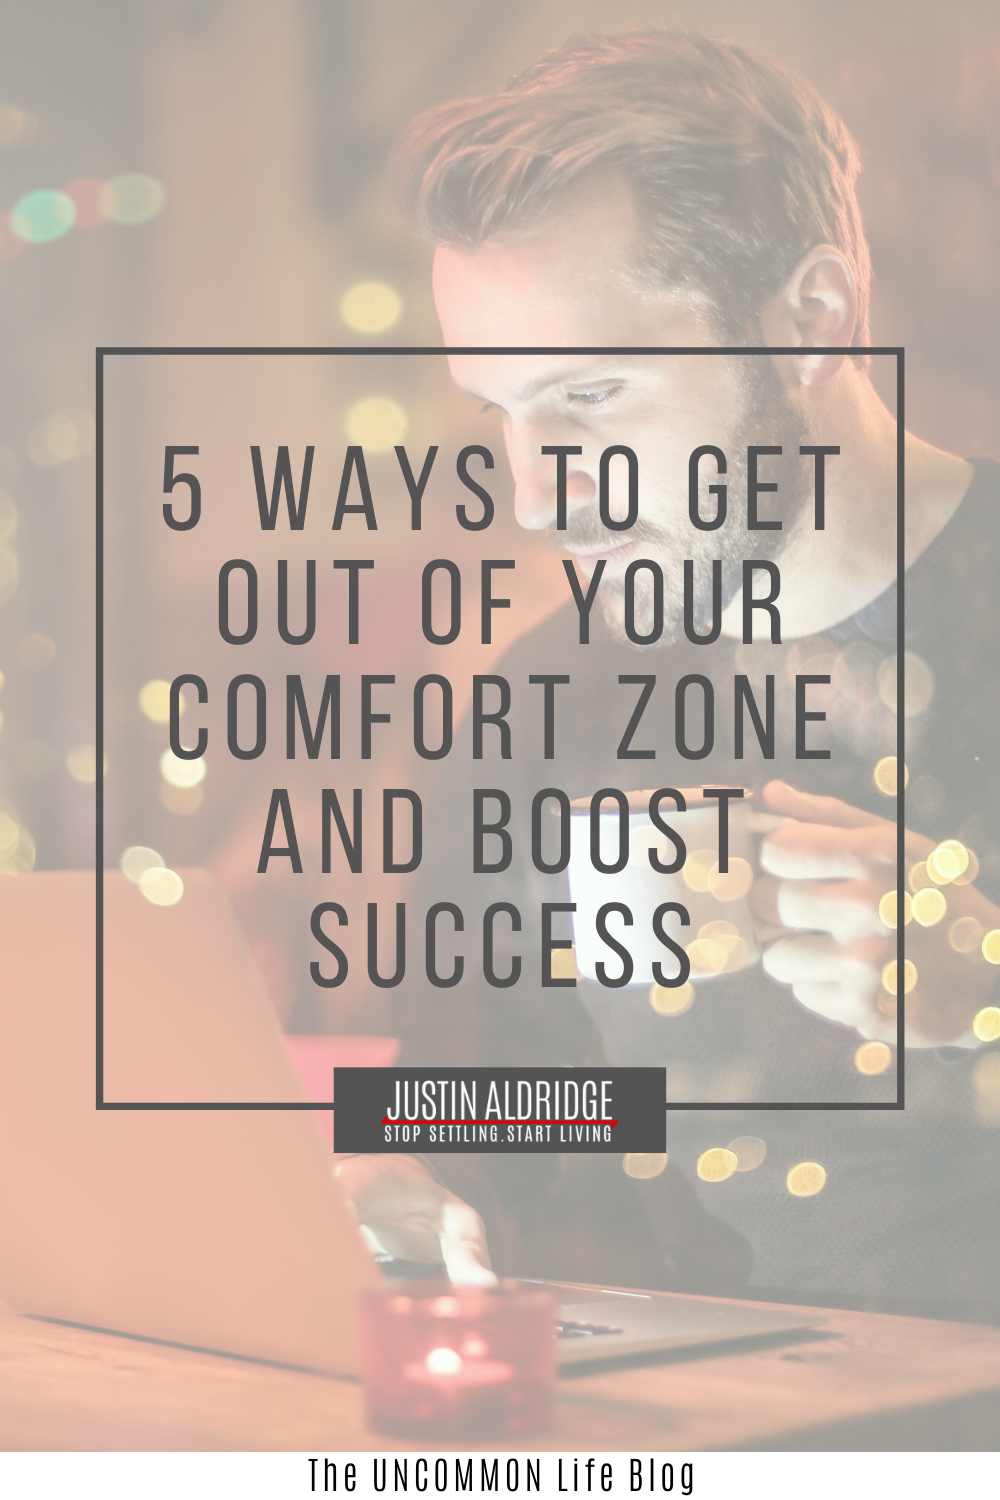 Man holding a coffee cup and staring down at his laptop in the background behind the text, "5 ways to get out of your comfort zone and boost success" in grey font.